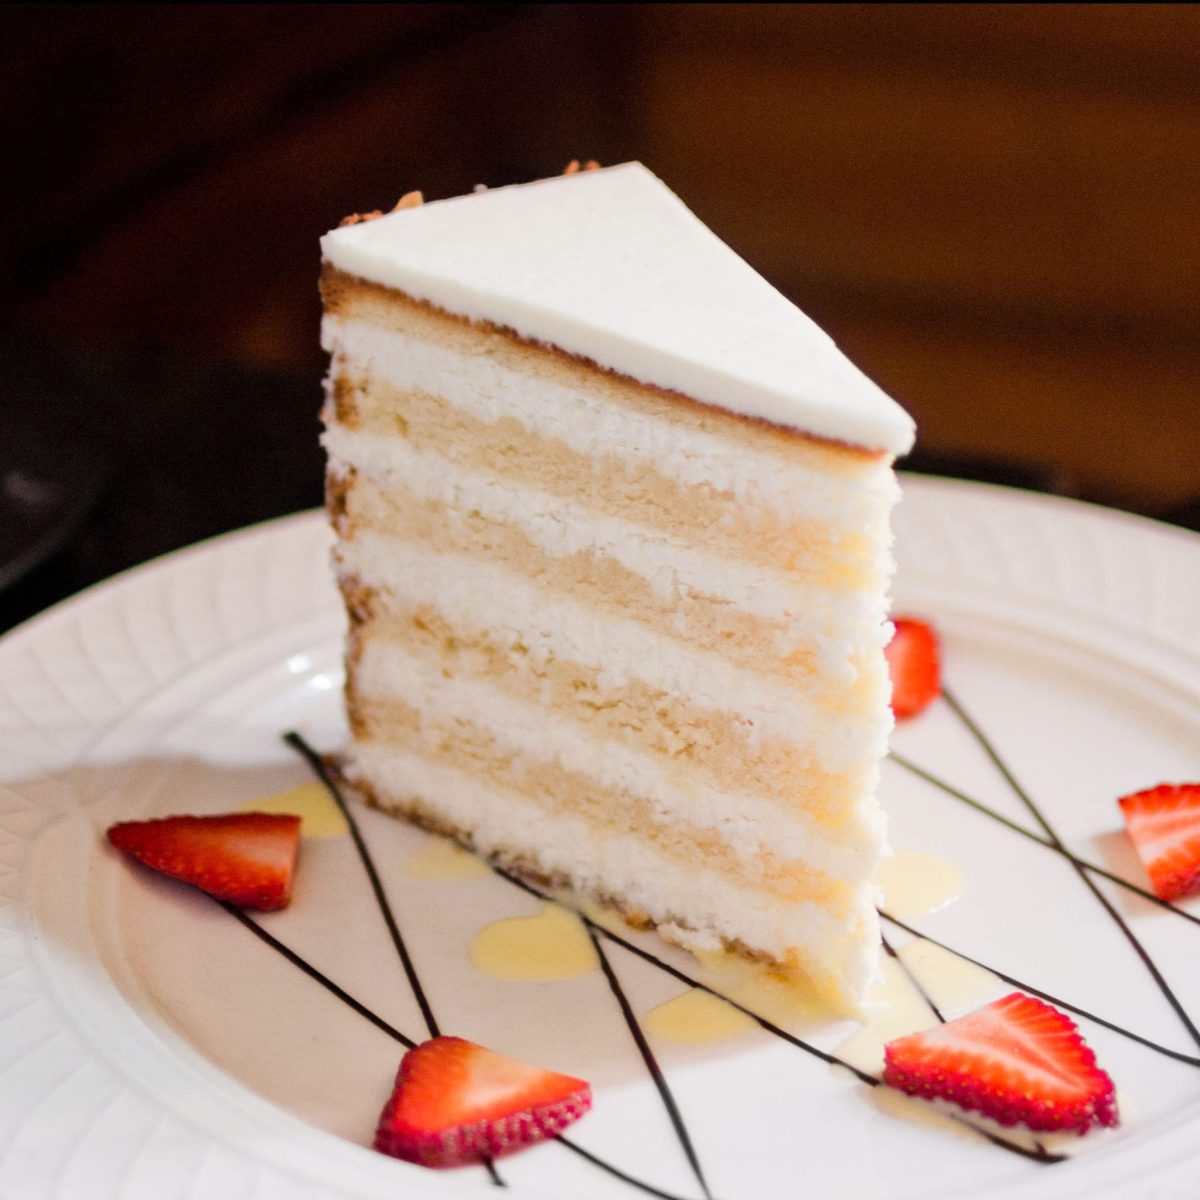 Peninsula Grill's Ultimate Coconut Cake with strawberries on plate